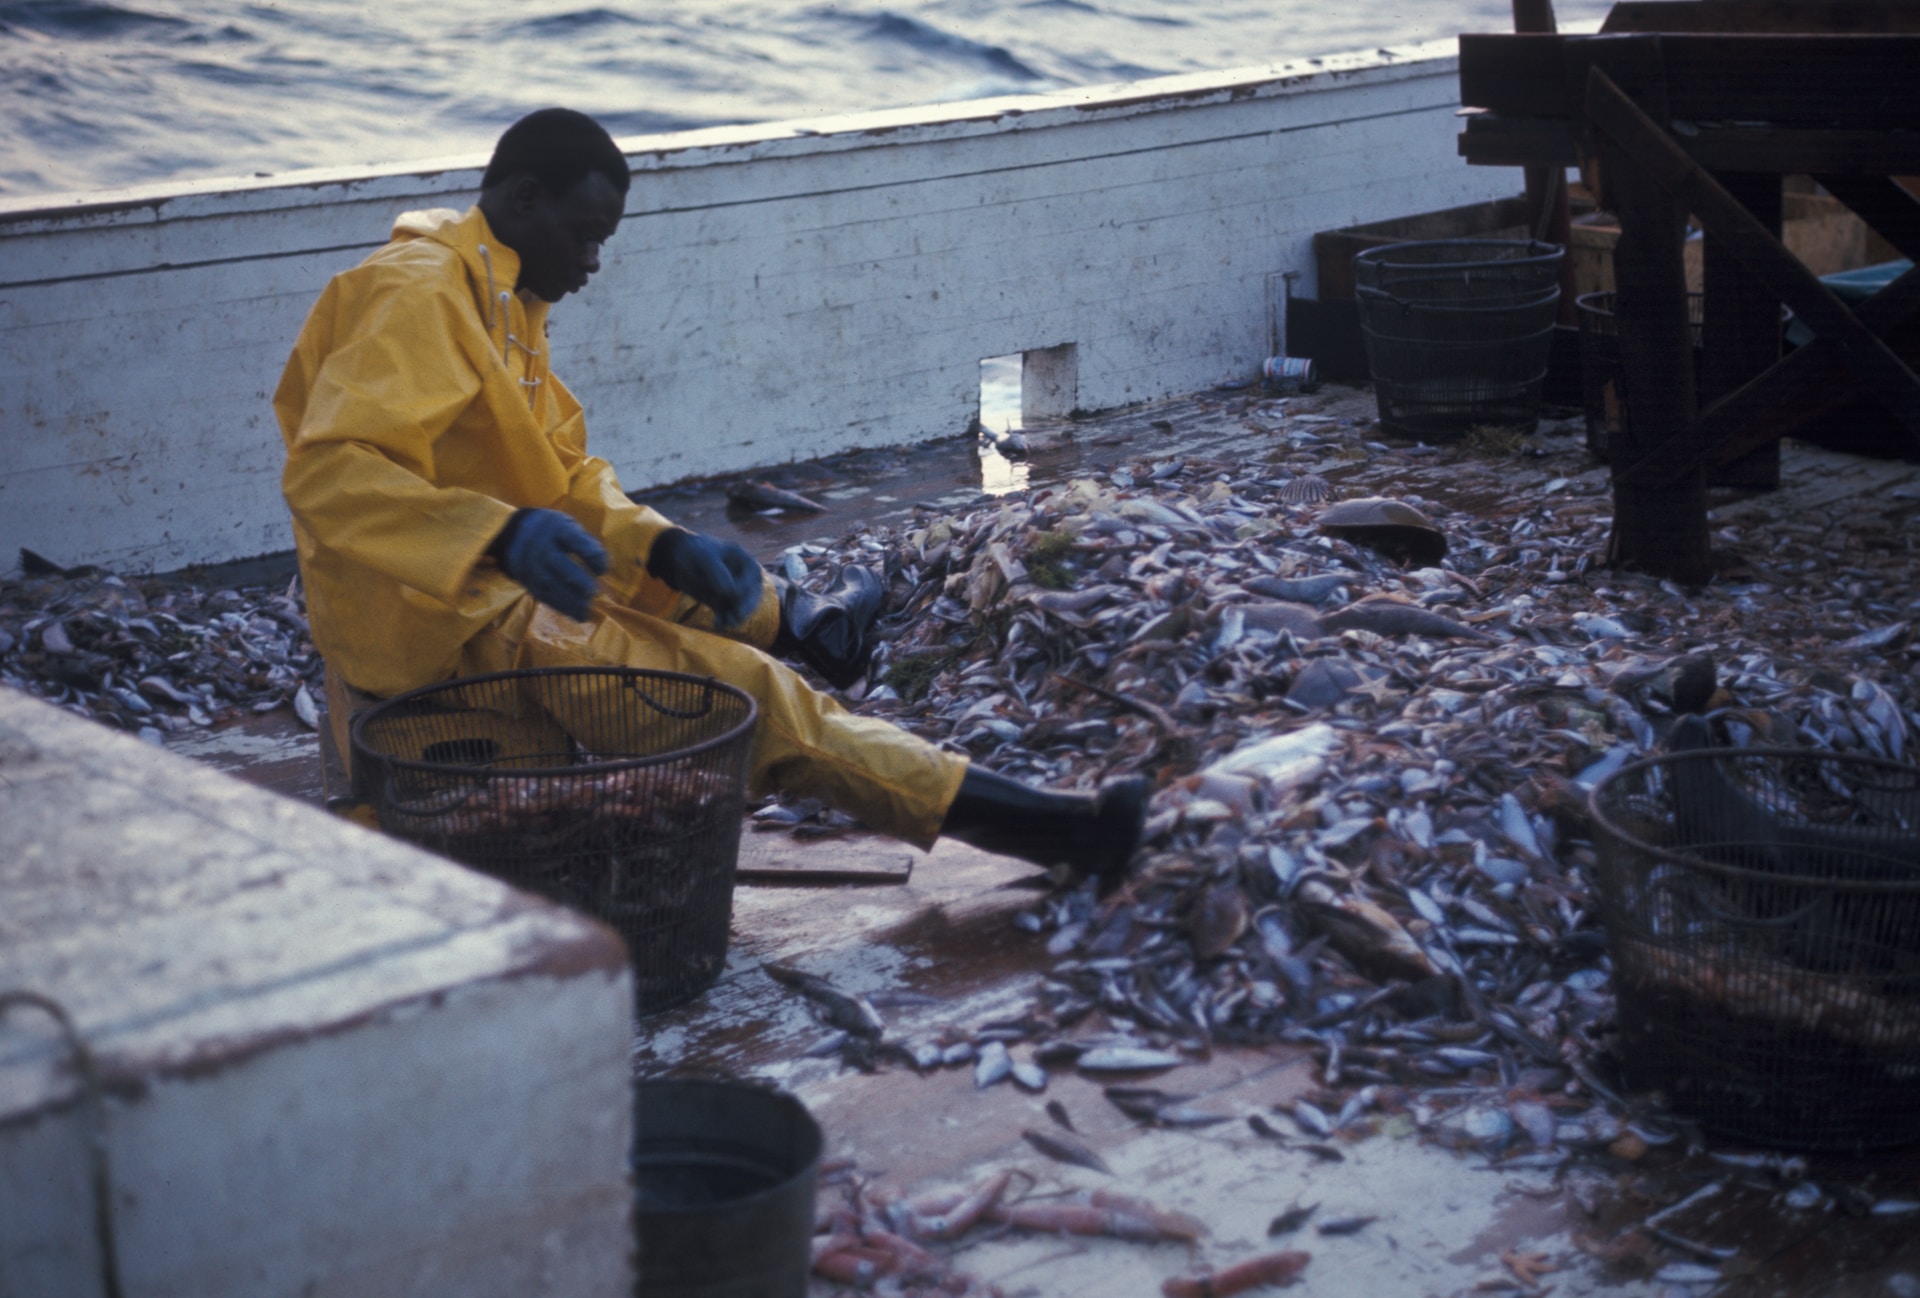 A commercial fisherman in a yellow rainsuit sits on the deck of a fishing boat with thousands of fish spewed in front of him.